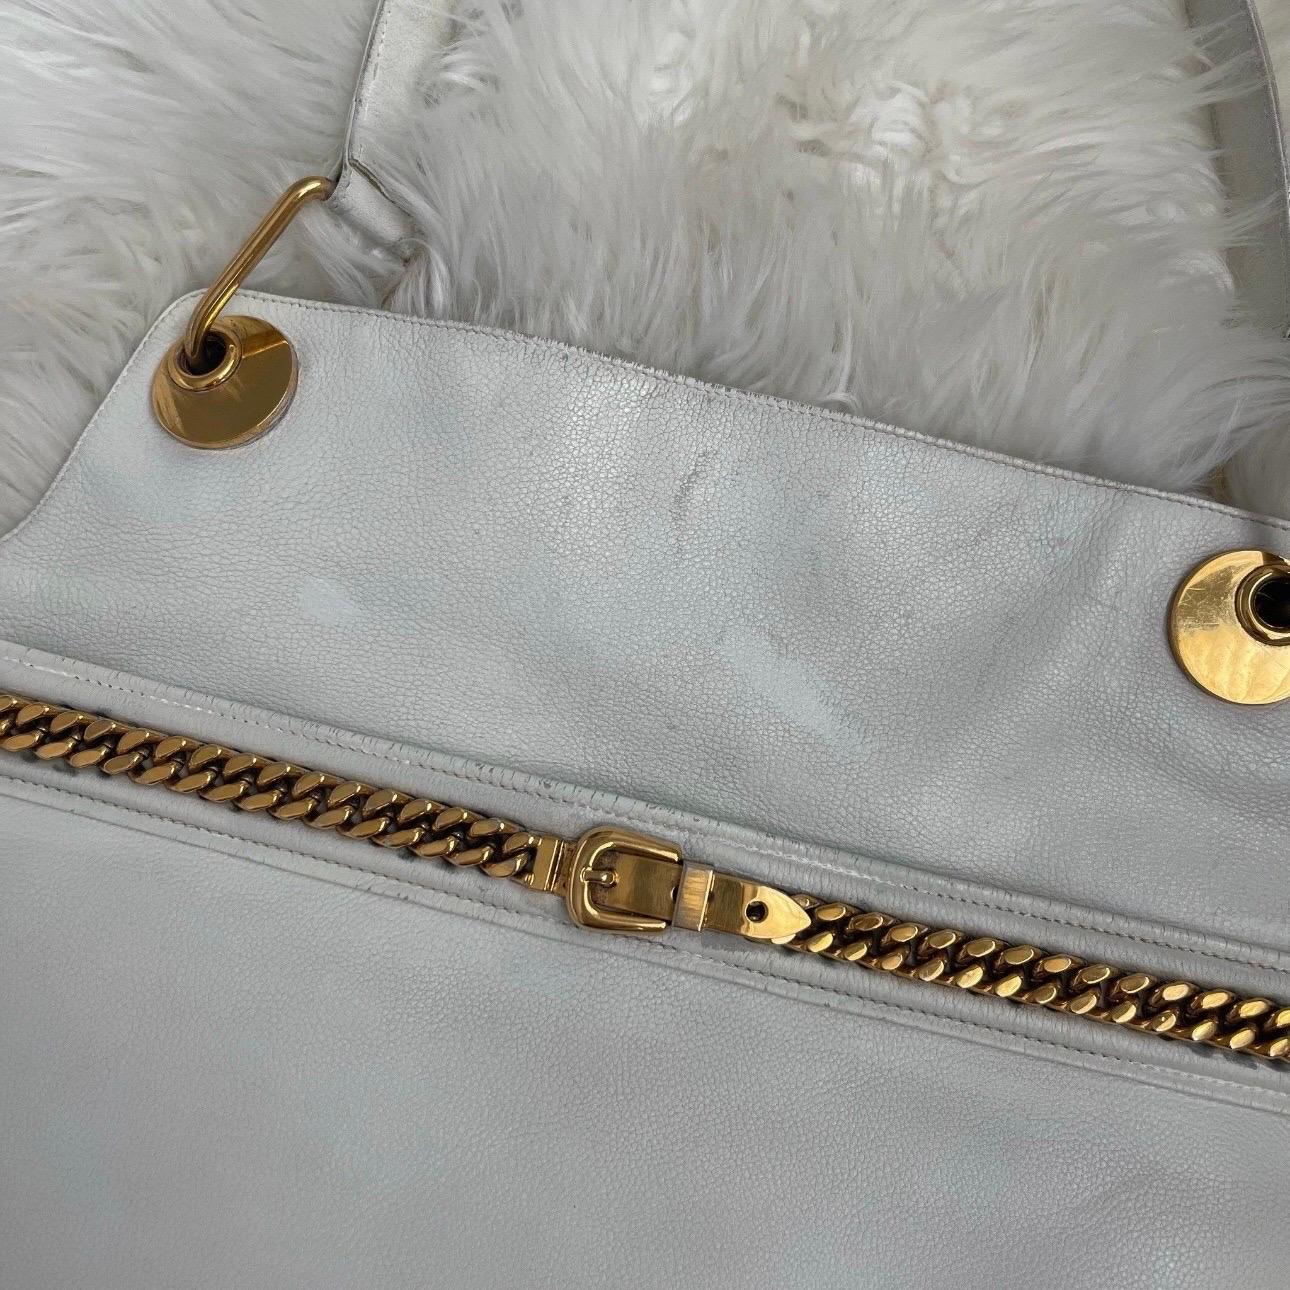 Vintage 80s Gucci GG White Shoulder Bag Crossbody with Gold Belt Chain Across For Sale 2